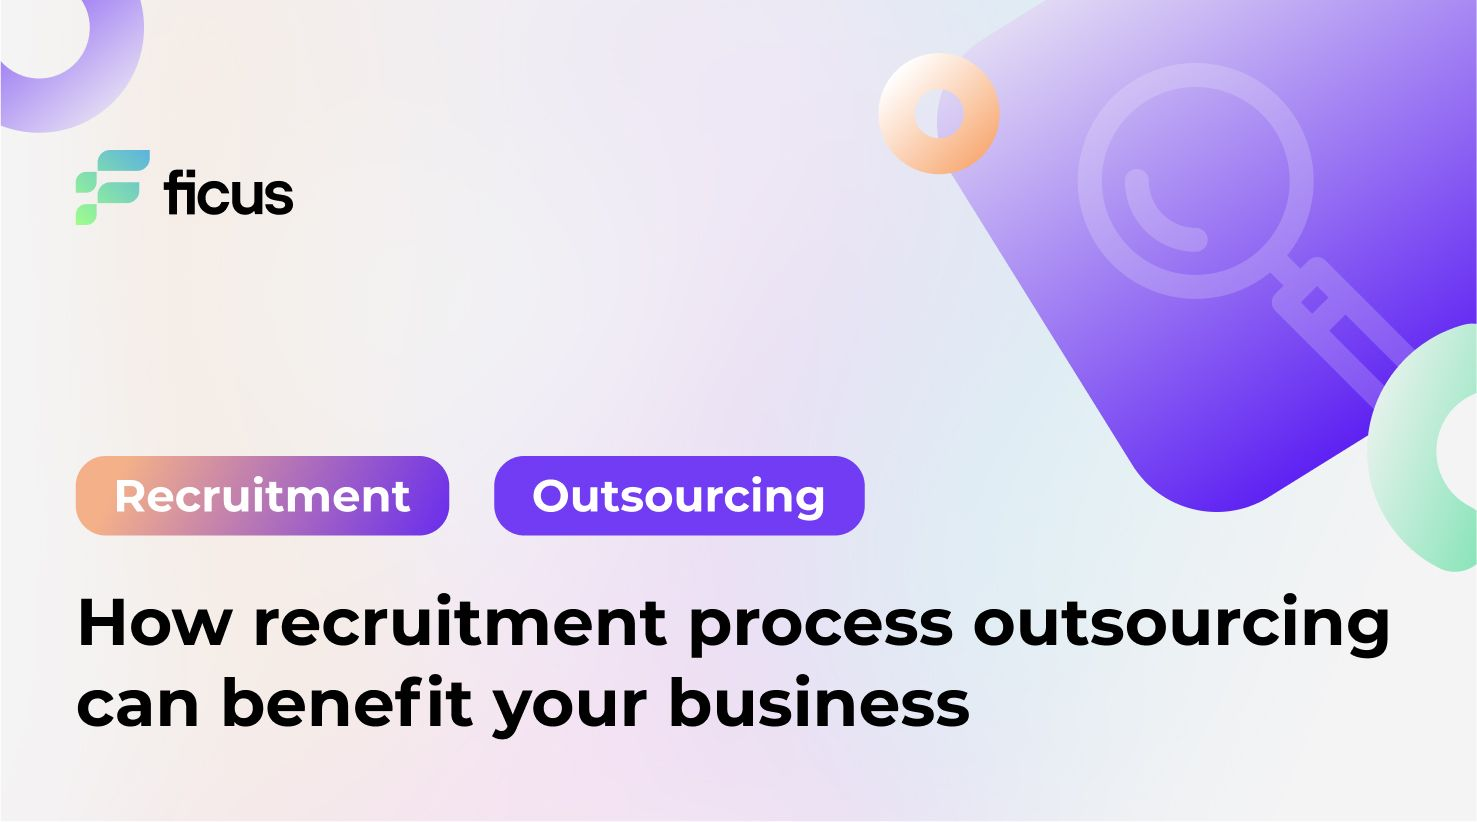 How recruitment process outsourcing can benefit your business